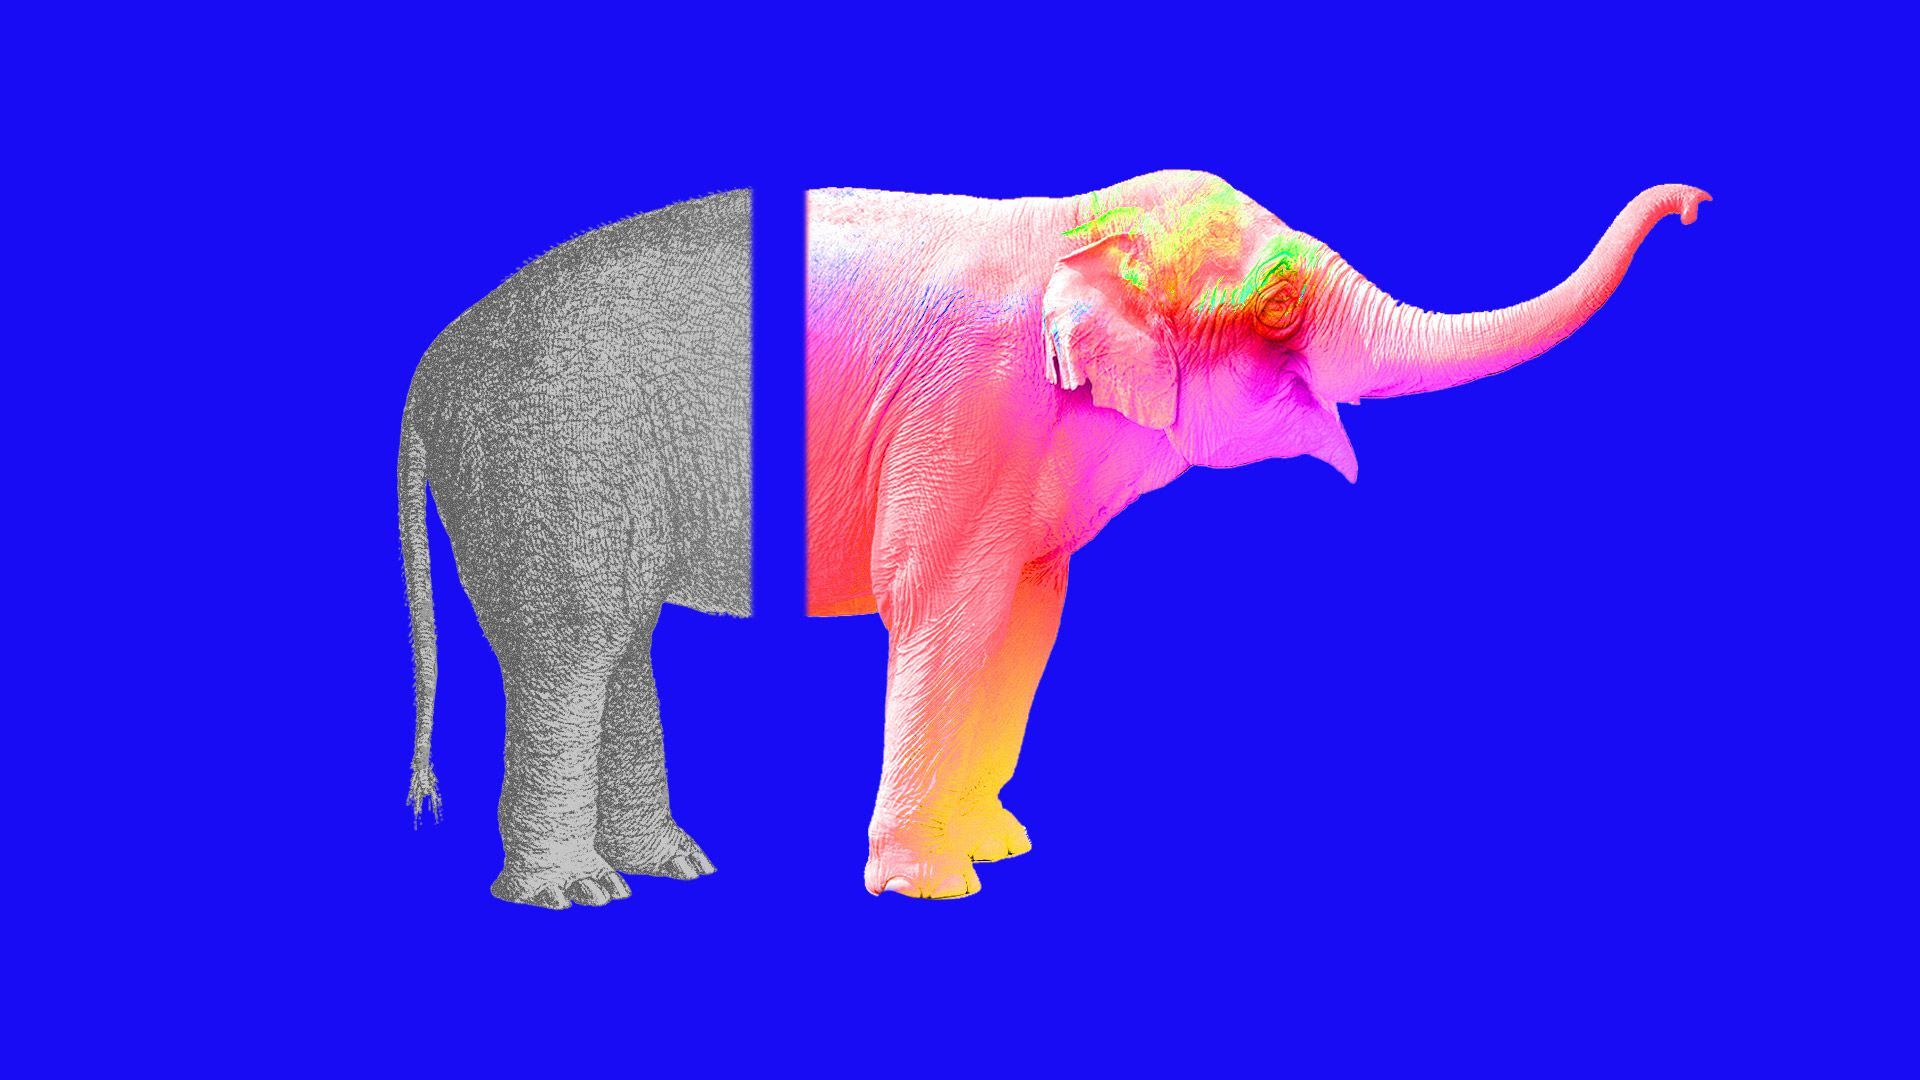 An illustration of a Republican elephant cut down the middle